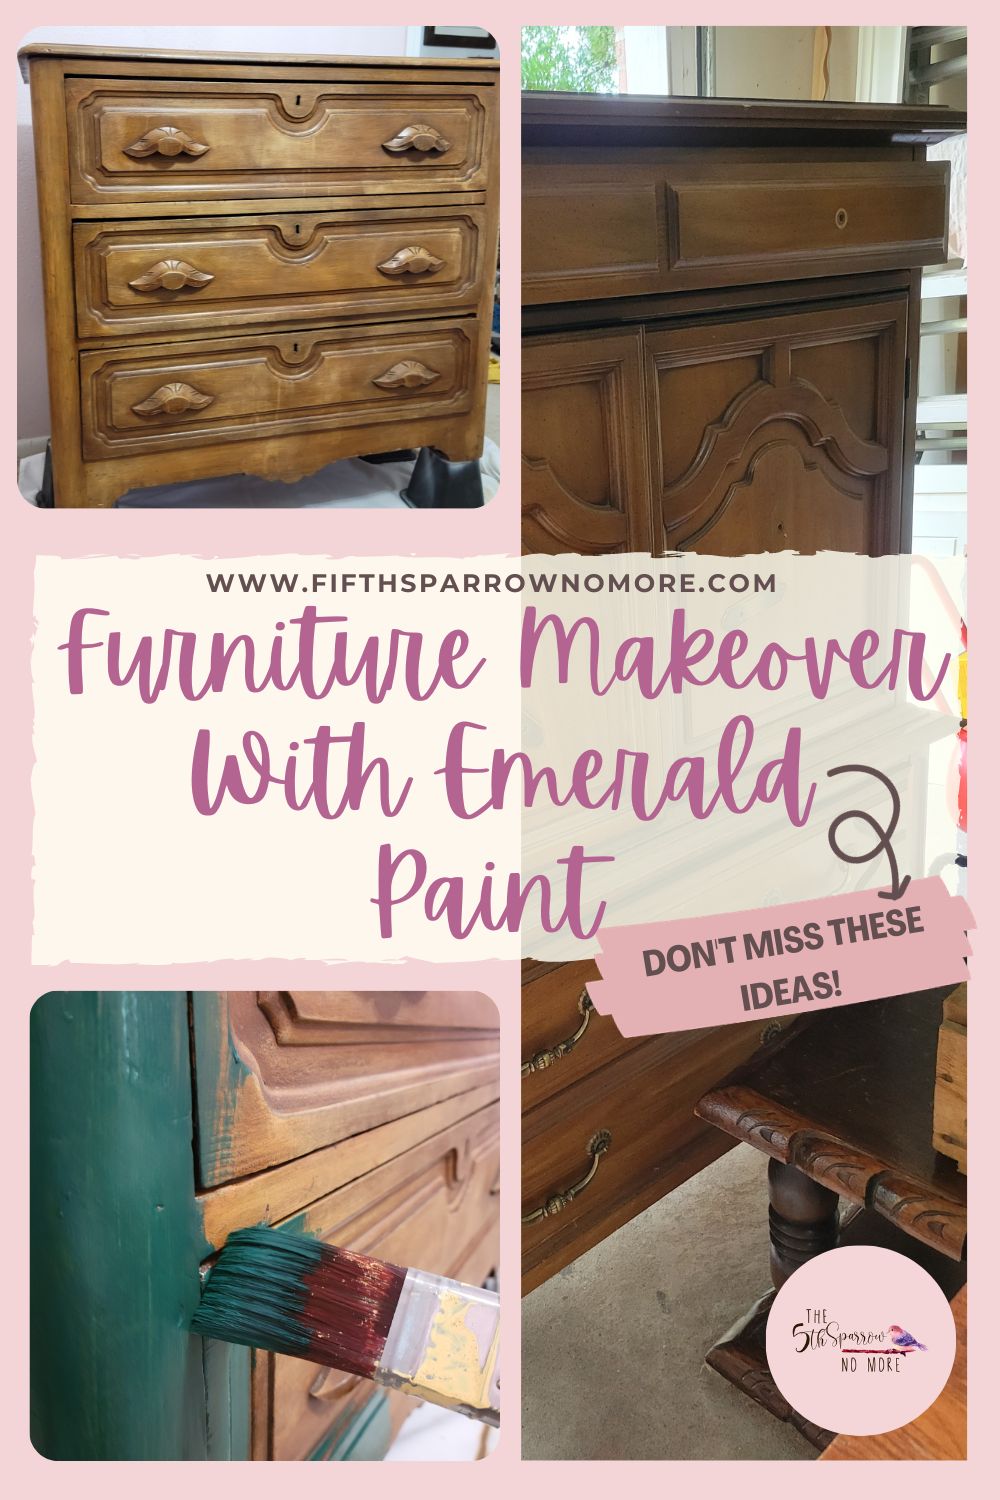 Give new life to old thrifted furniture with these dresser makeovers that were made beautiful with emerald paint.